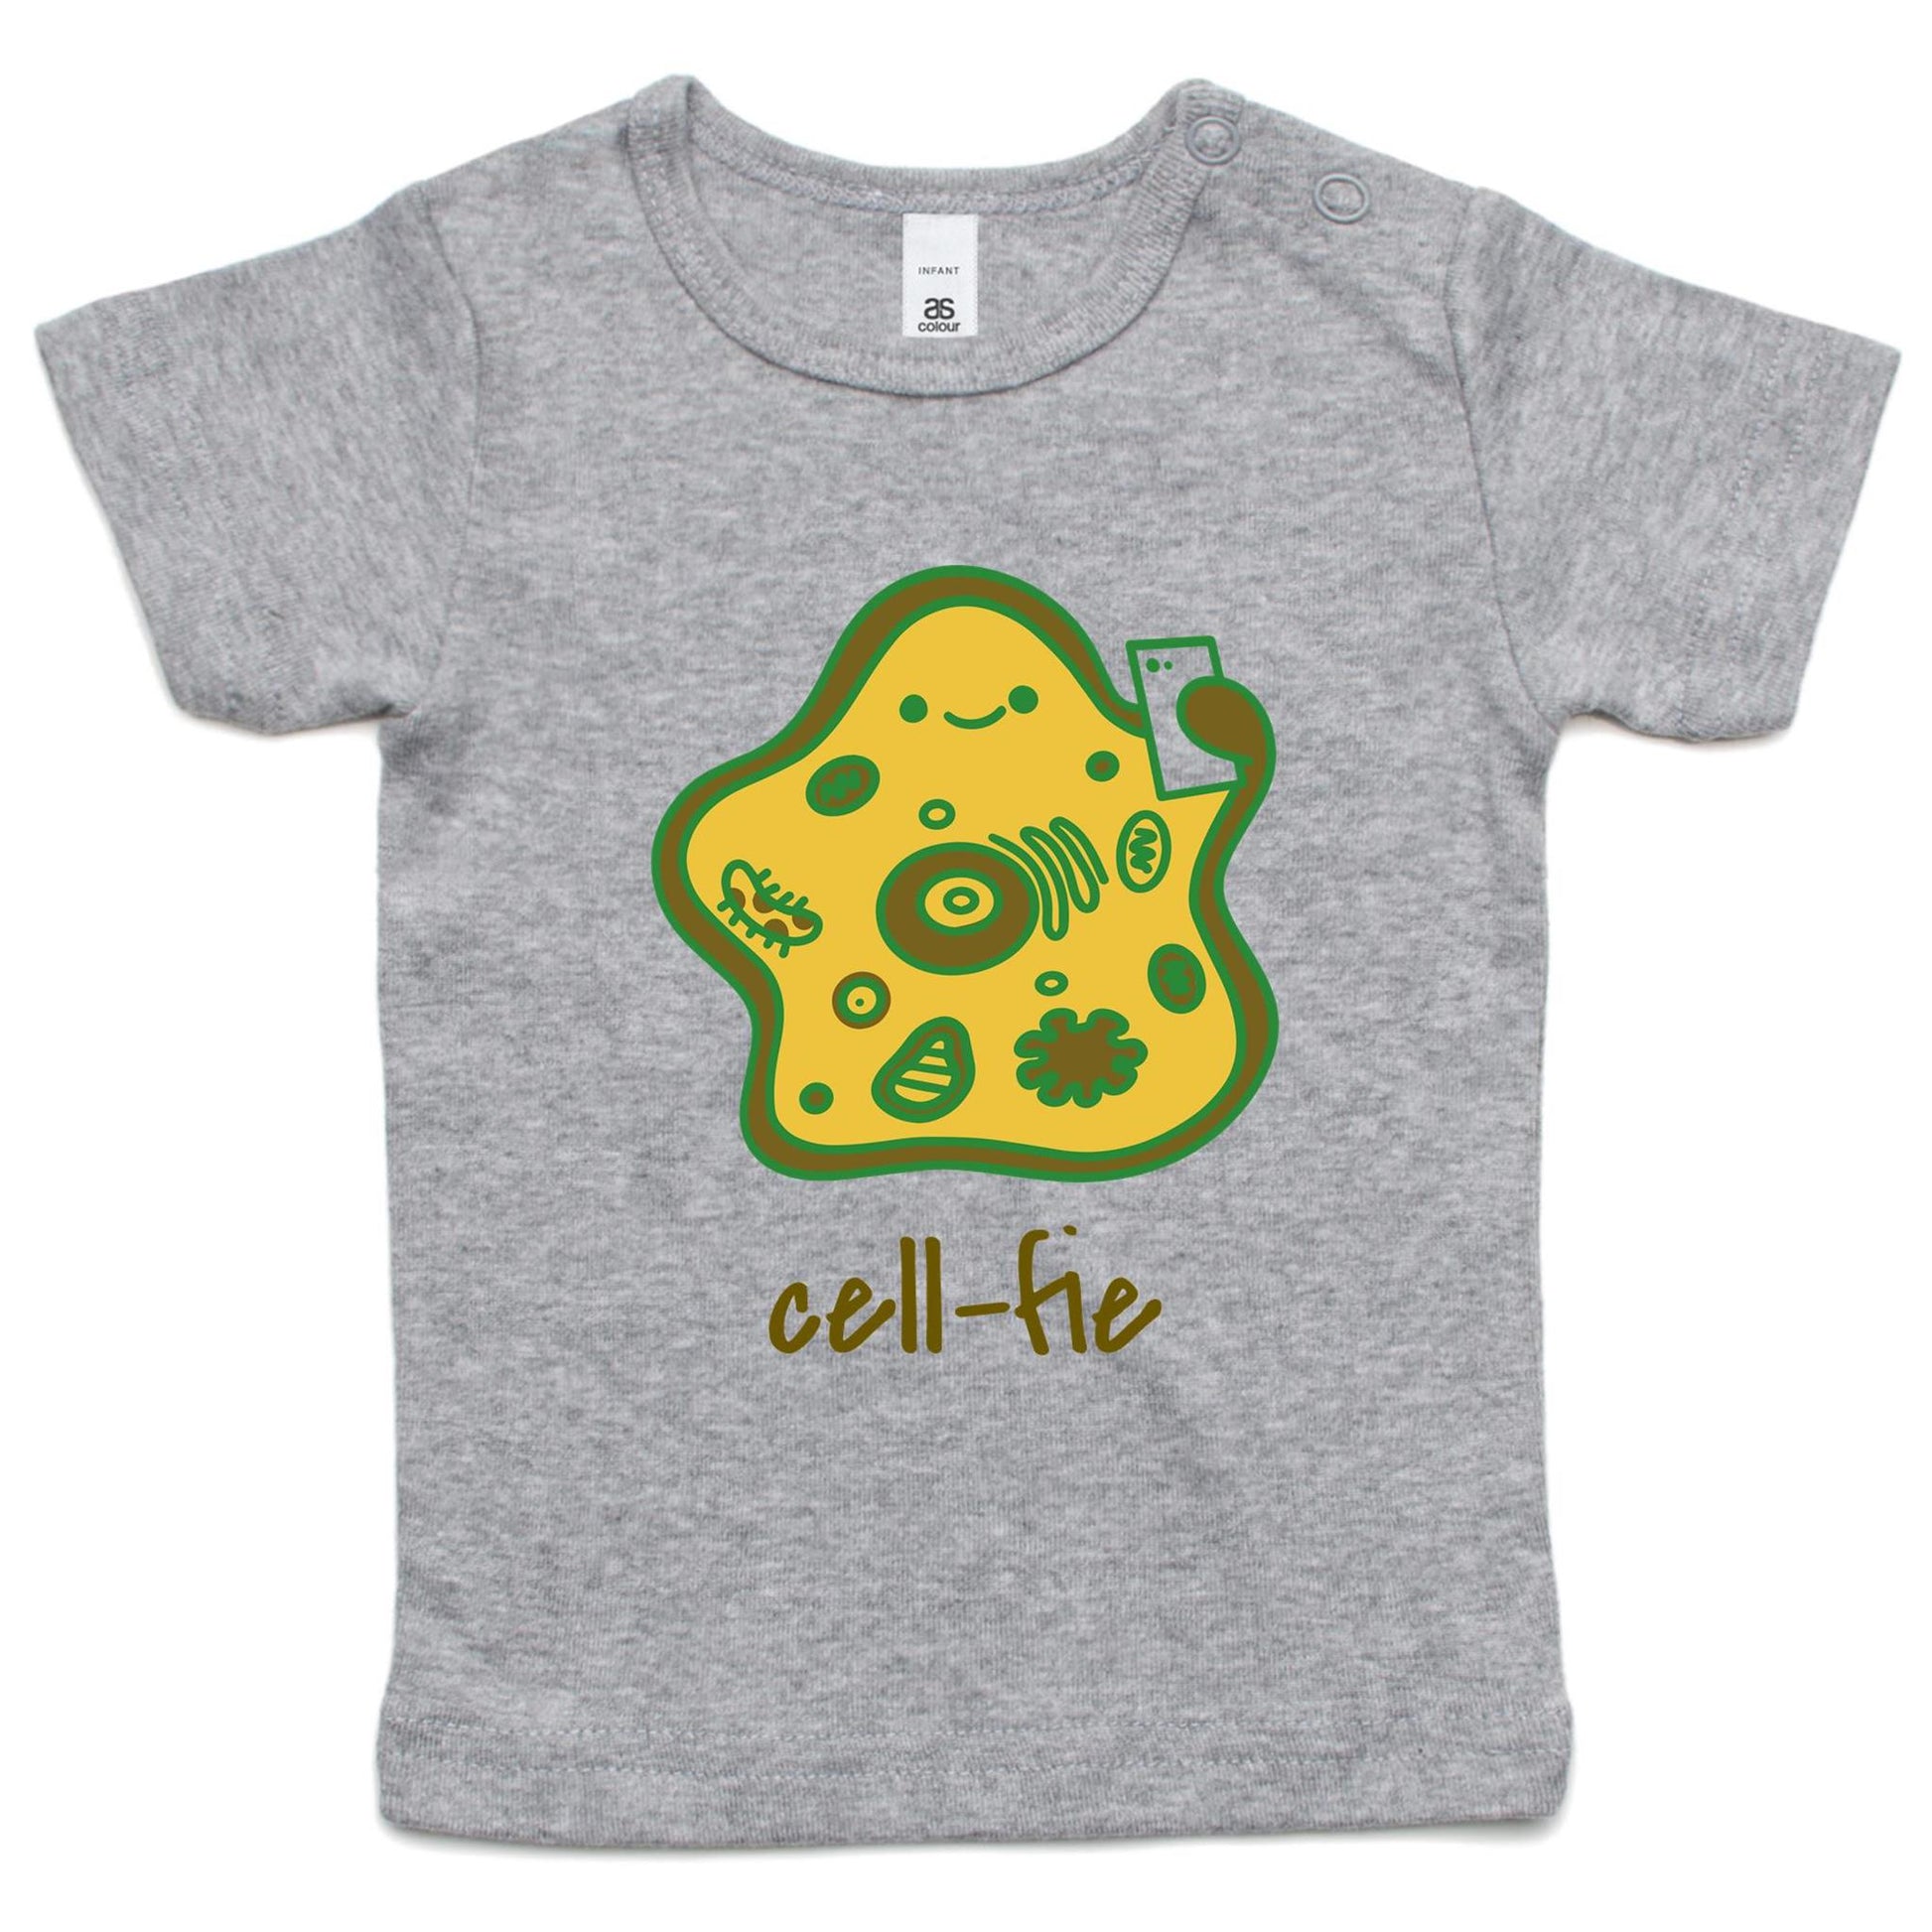 Cell-fie - Baby T-shirt Grey Marle Baby T-shirt Science